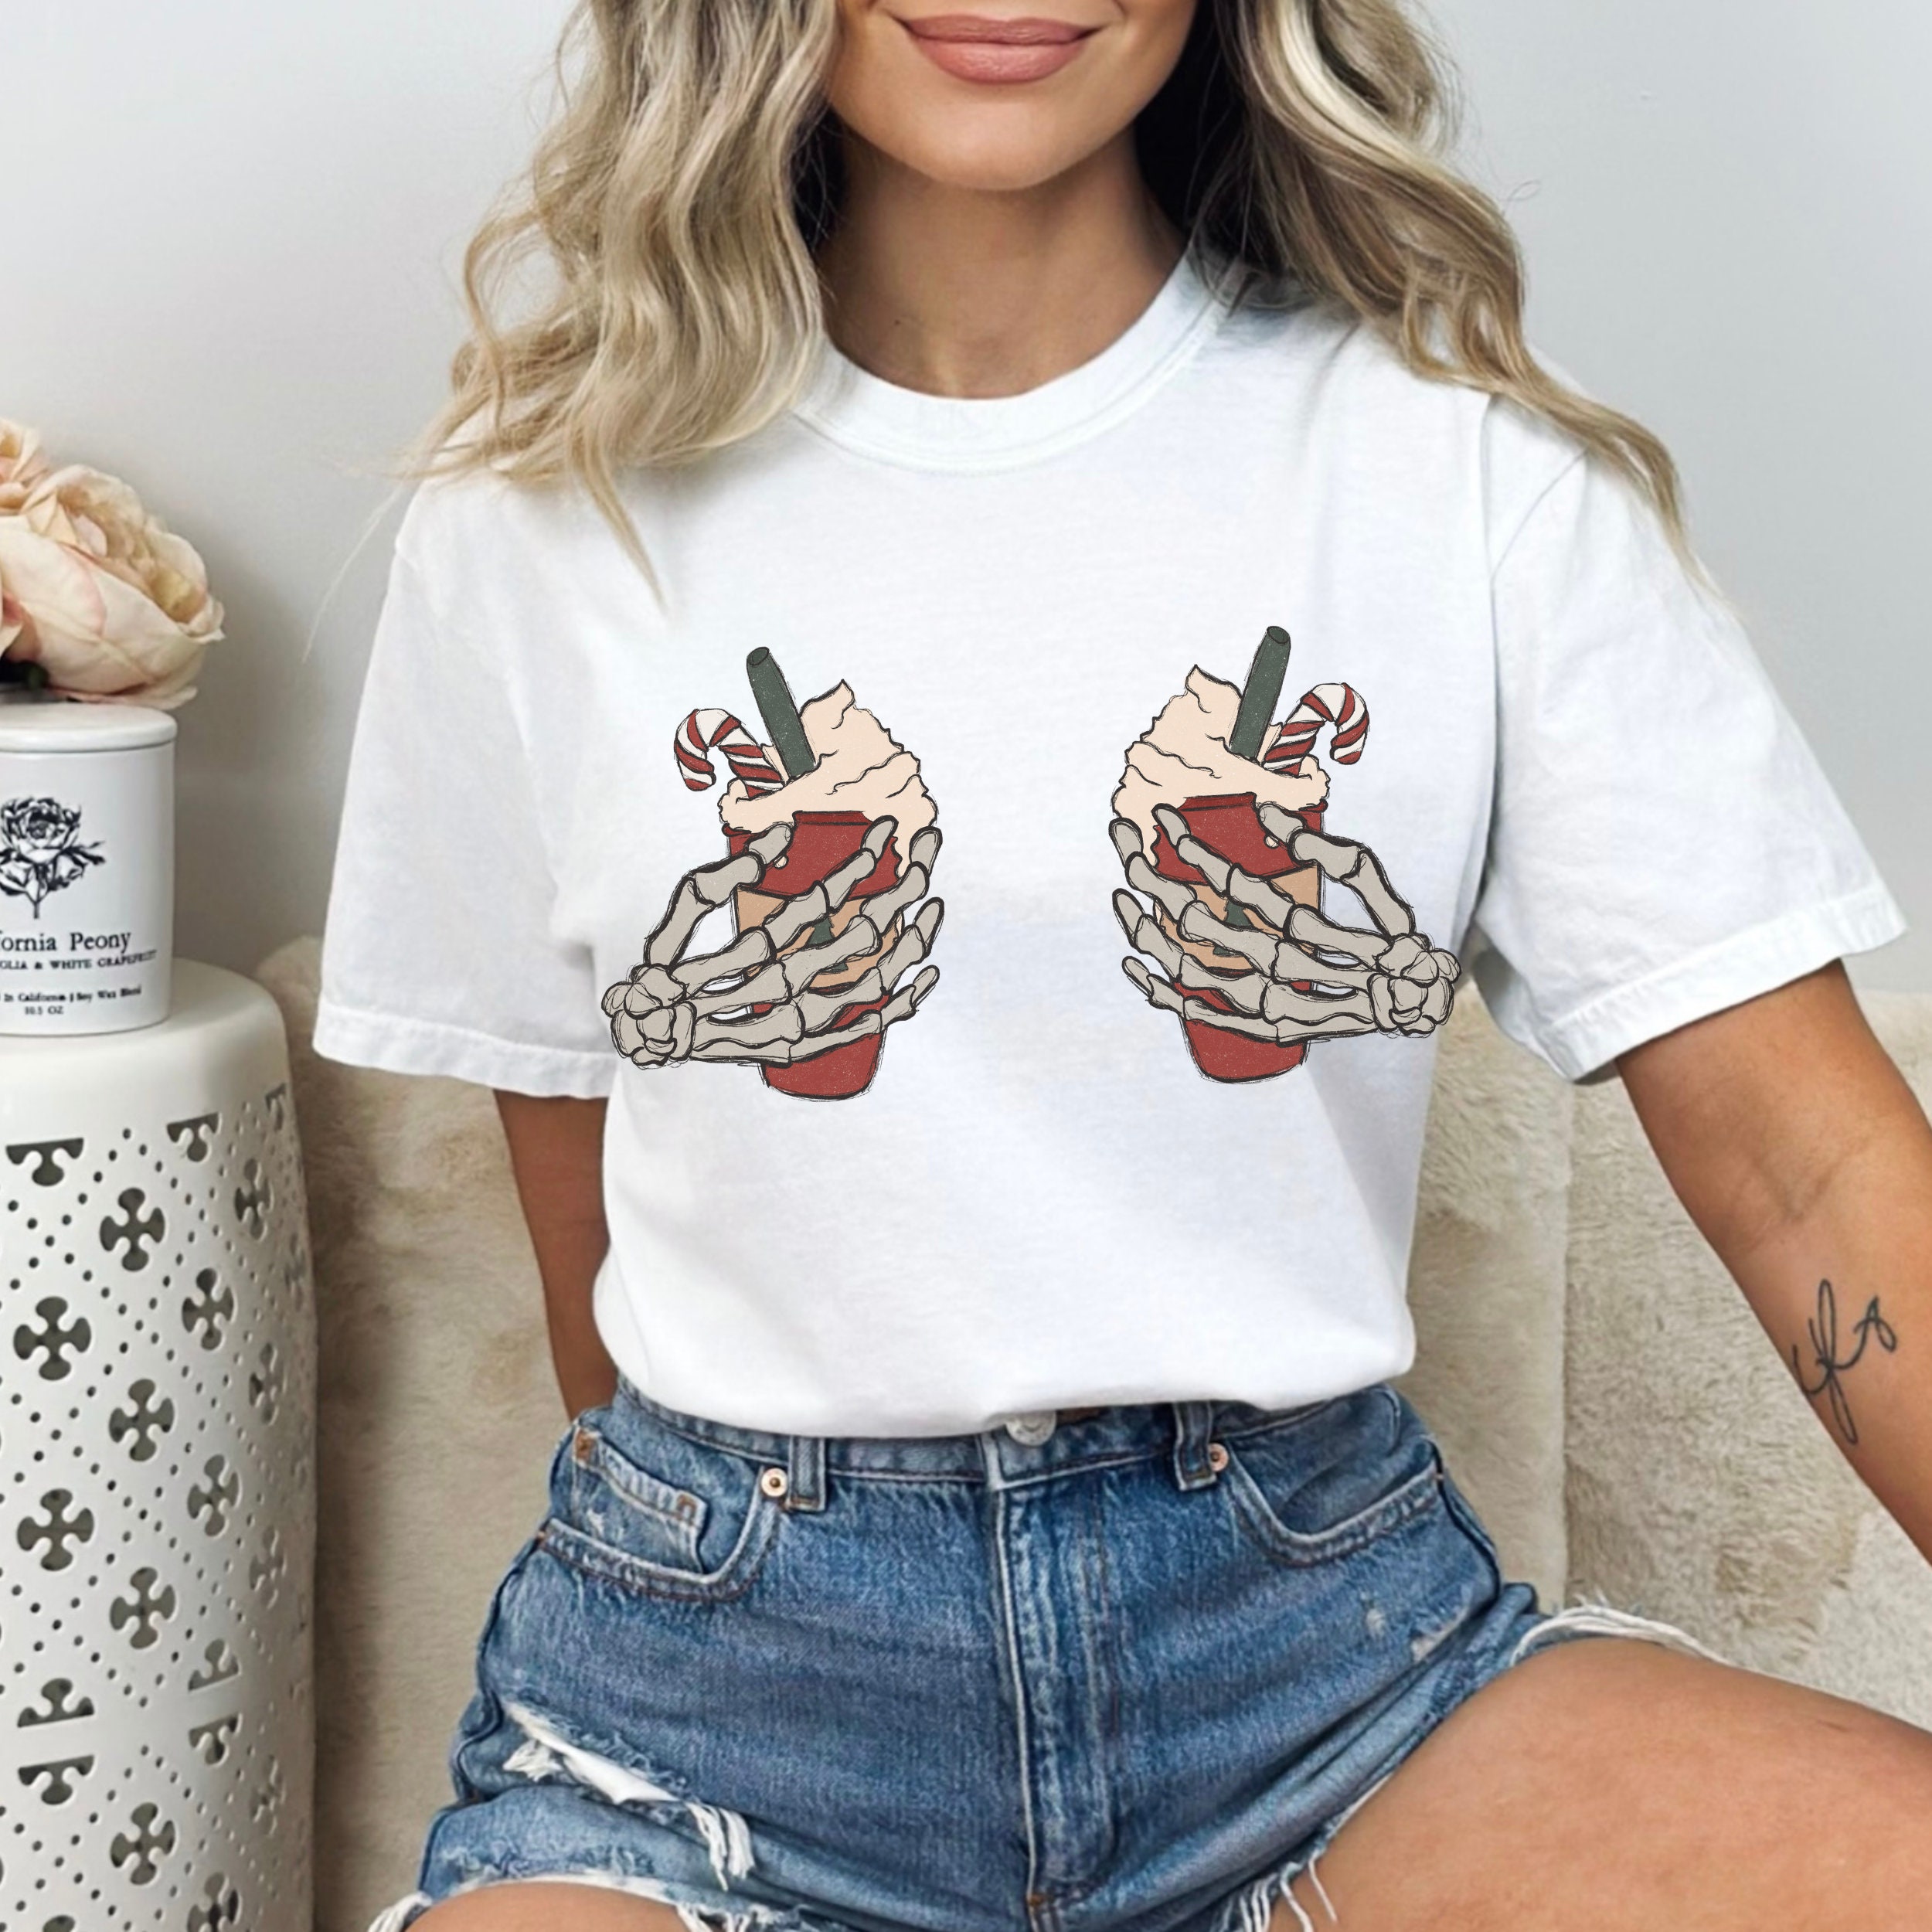 Discover Goblincore Skeleton Hands  Shirt, Christmas Candy Cane Drink Tshirt, Funny Halloween Womens Shirt, Holiday Skeleton Shirt